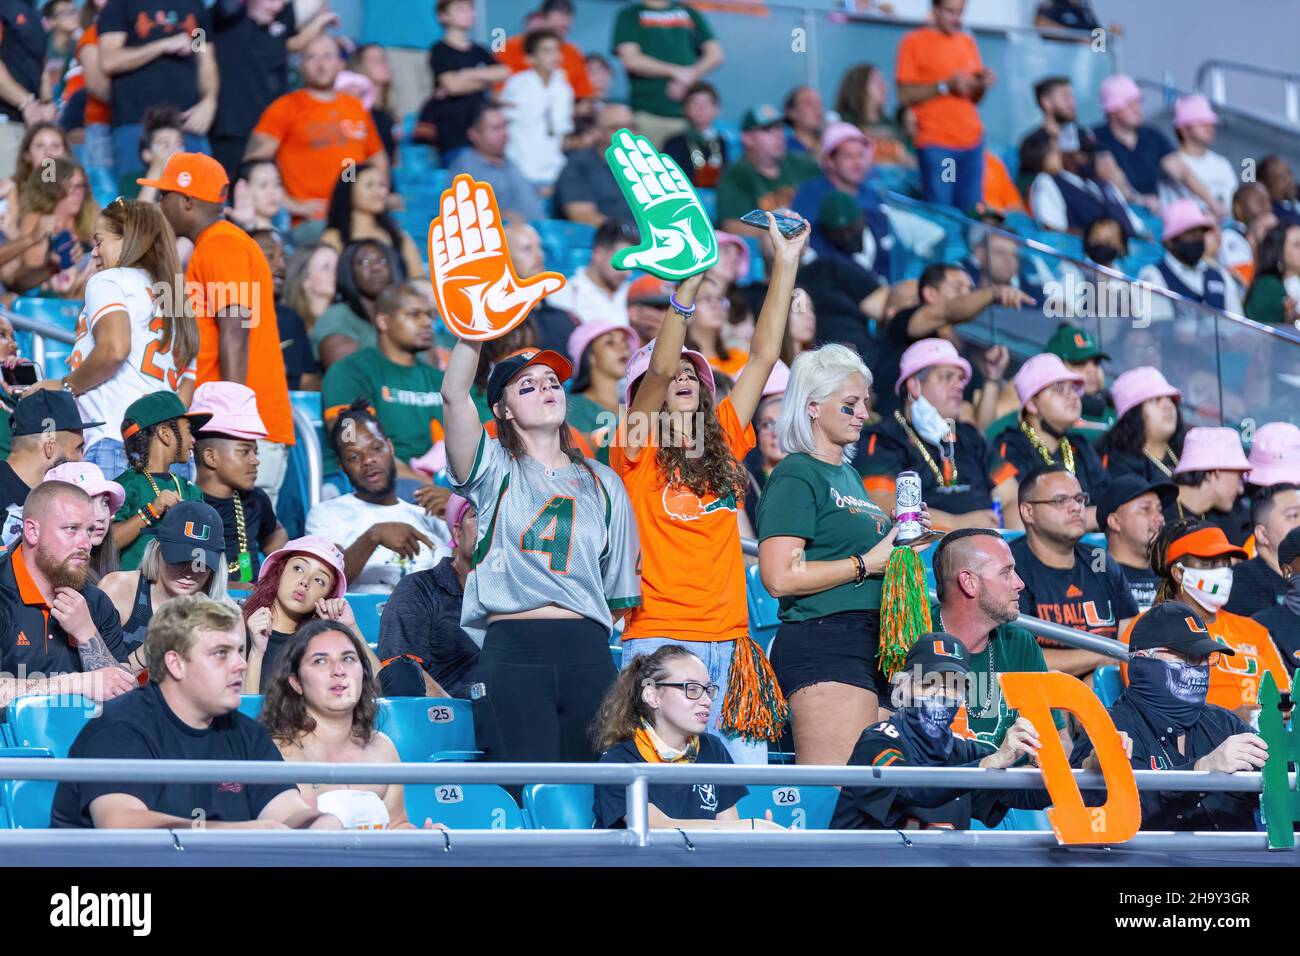 Oct. 23, 2021 - Miami Gardens, Florida, USA: Miami Hurricanes v NC State Wolfpack, 2021 College Football Game in Hard Rock Stadium. Stock Photo